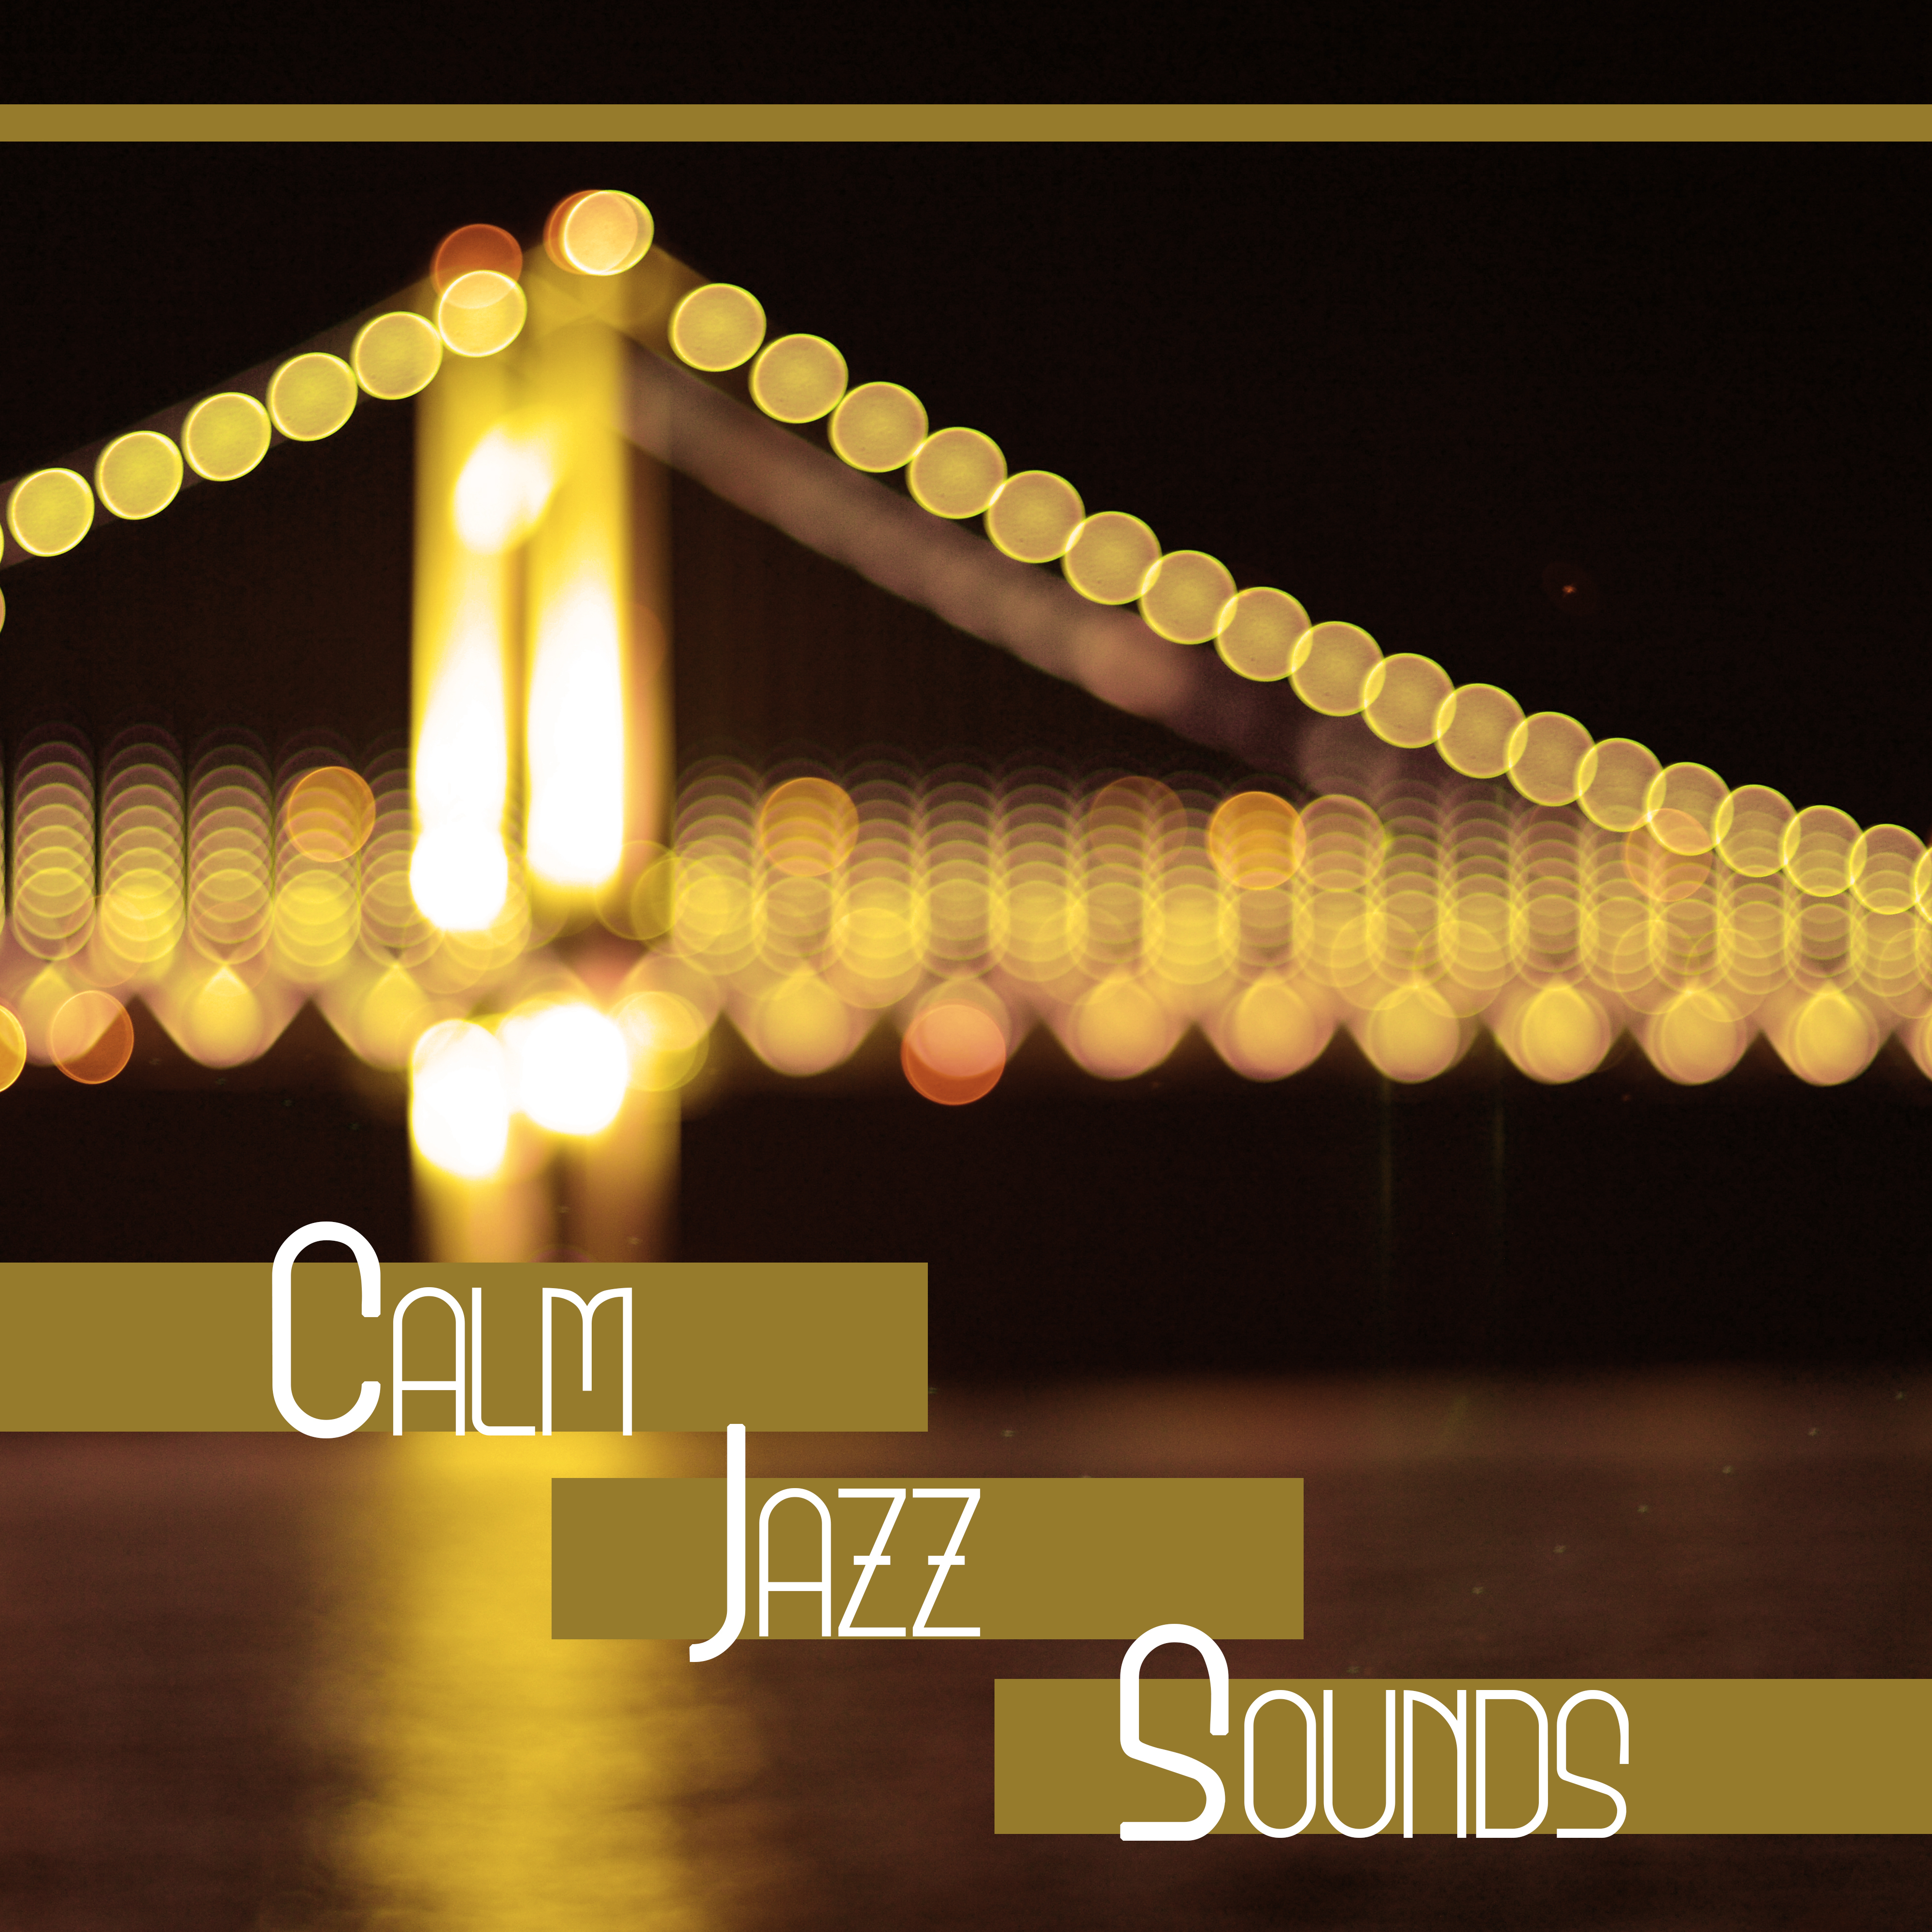 Calm Jazz Sounds – Rest with Jazz, Relaxing Music, Shades of Jazz, Moonlight Piano Bar